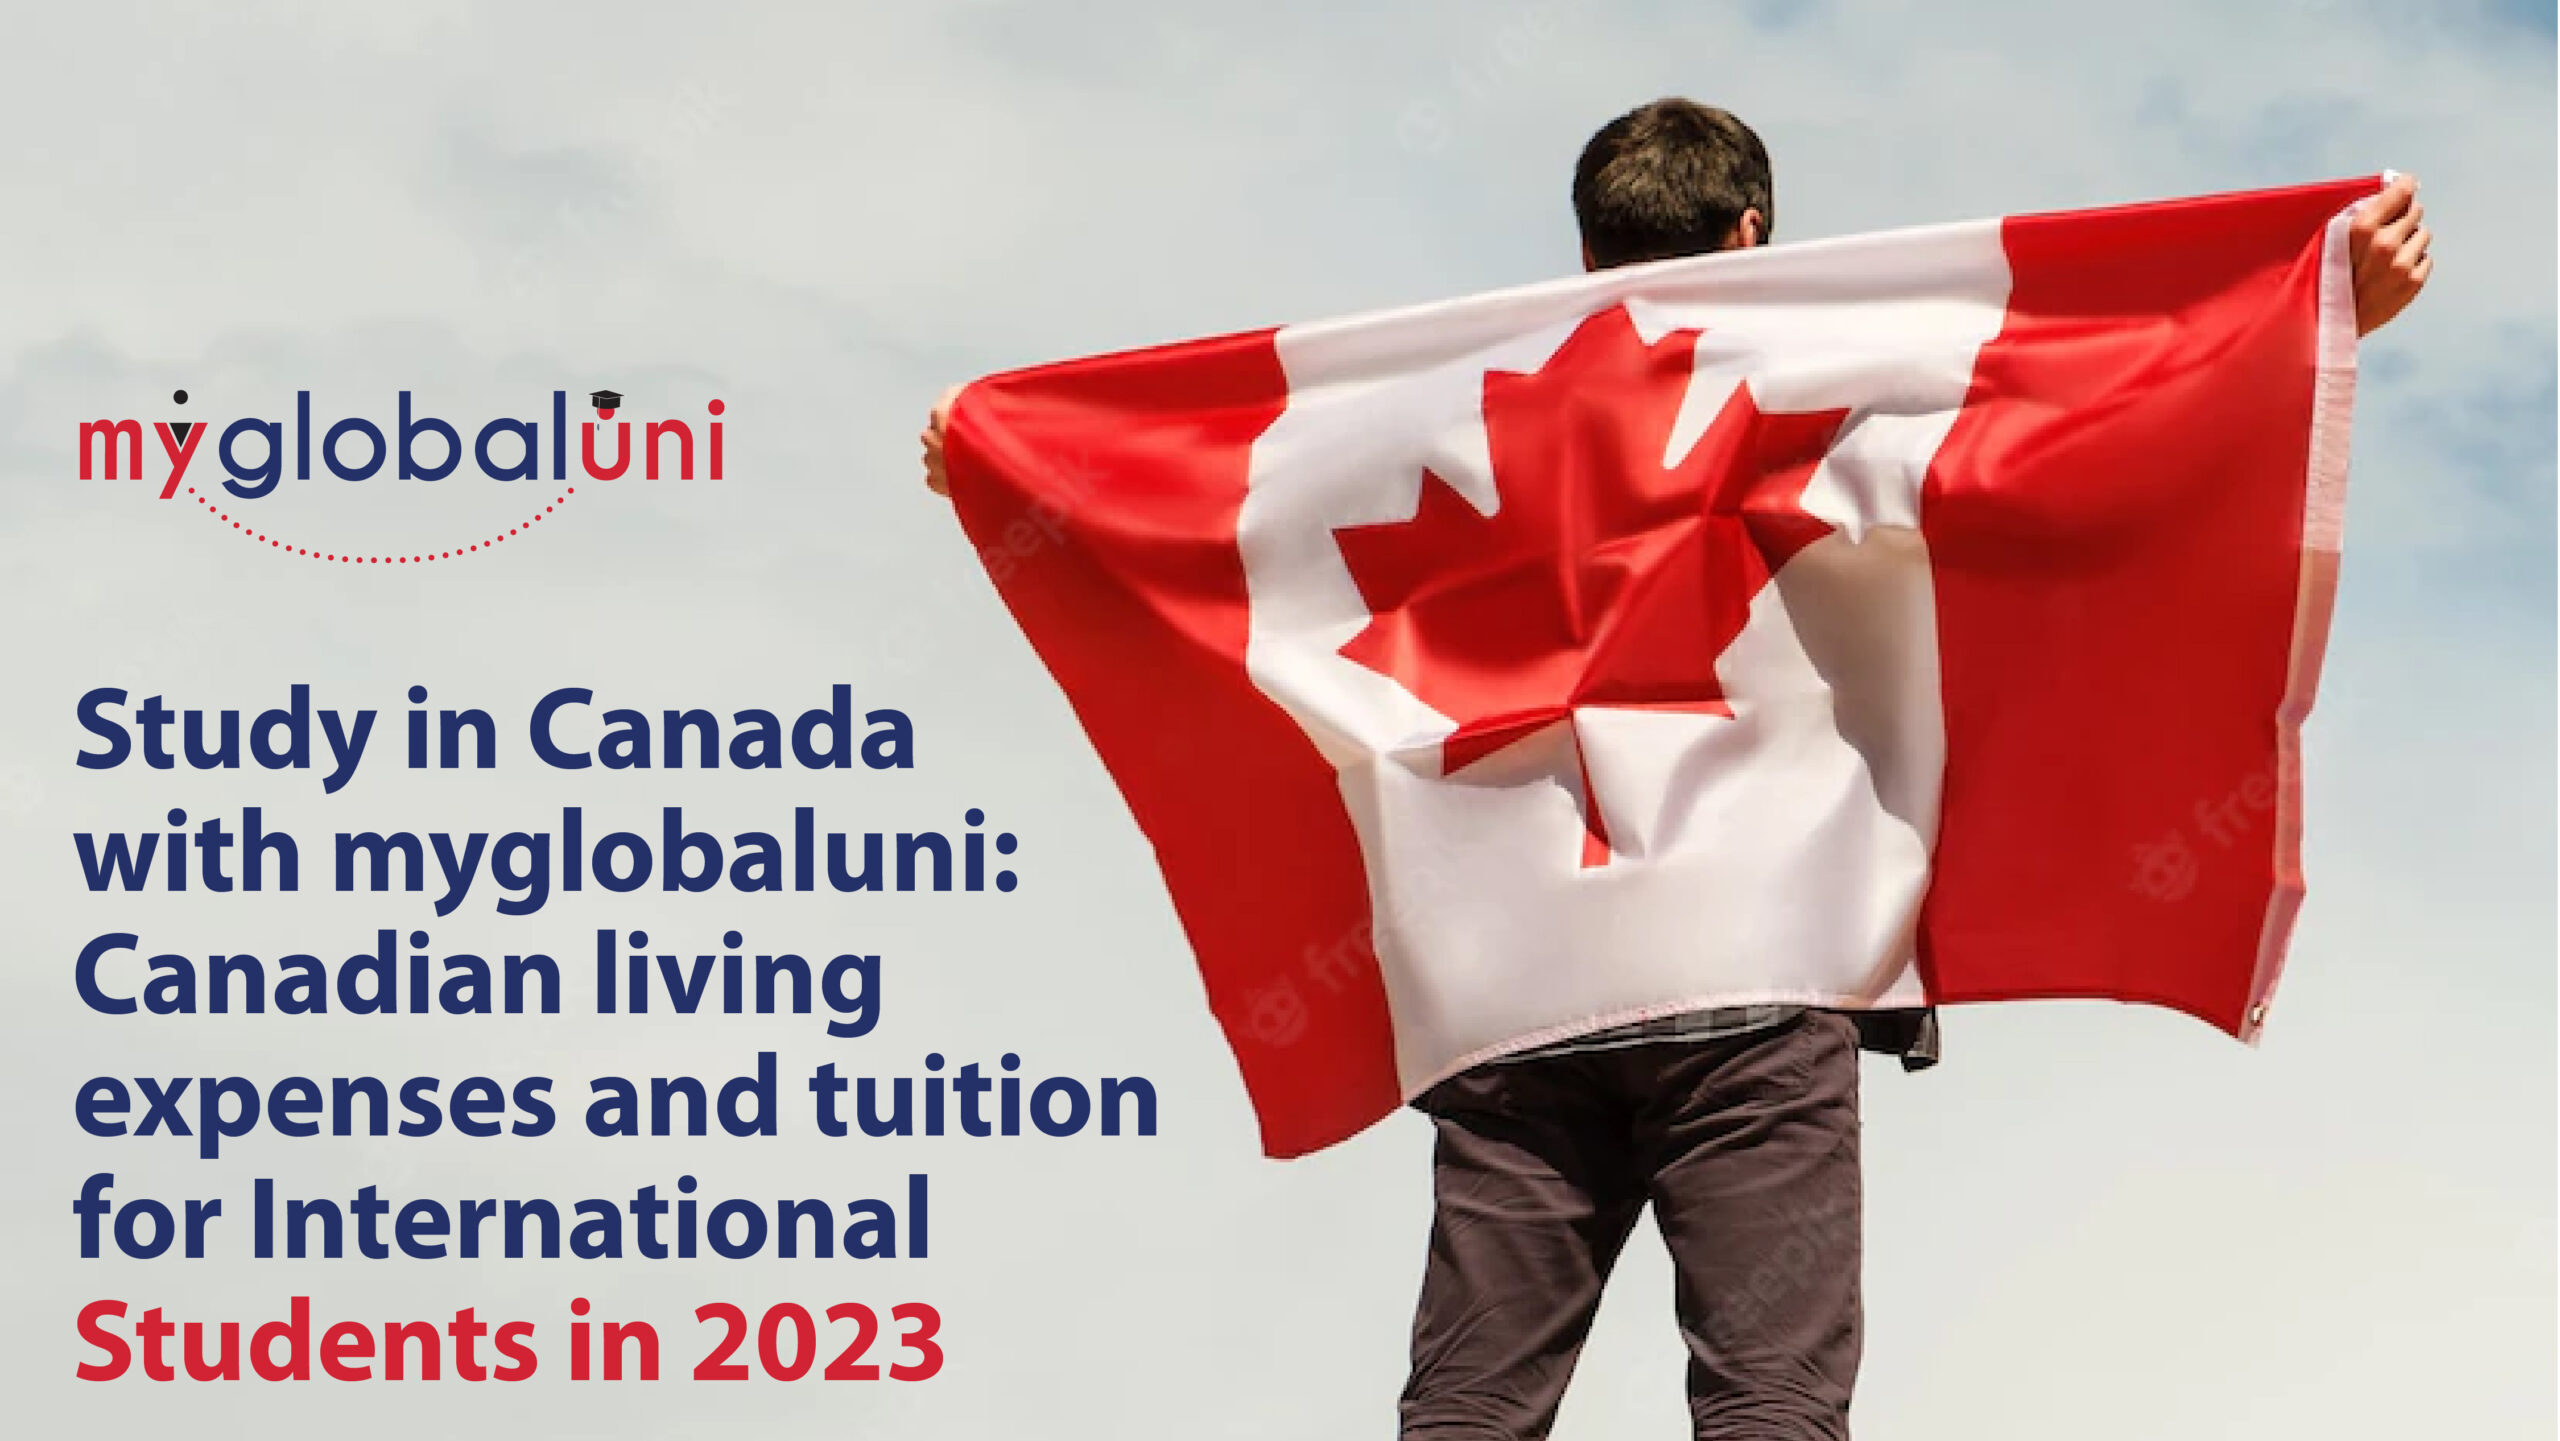 Study in Canada with myglobaluni: Canadian living expenses and tuition for International Students in 2023